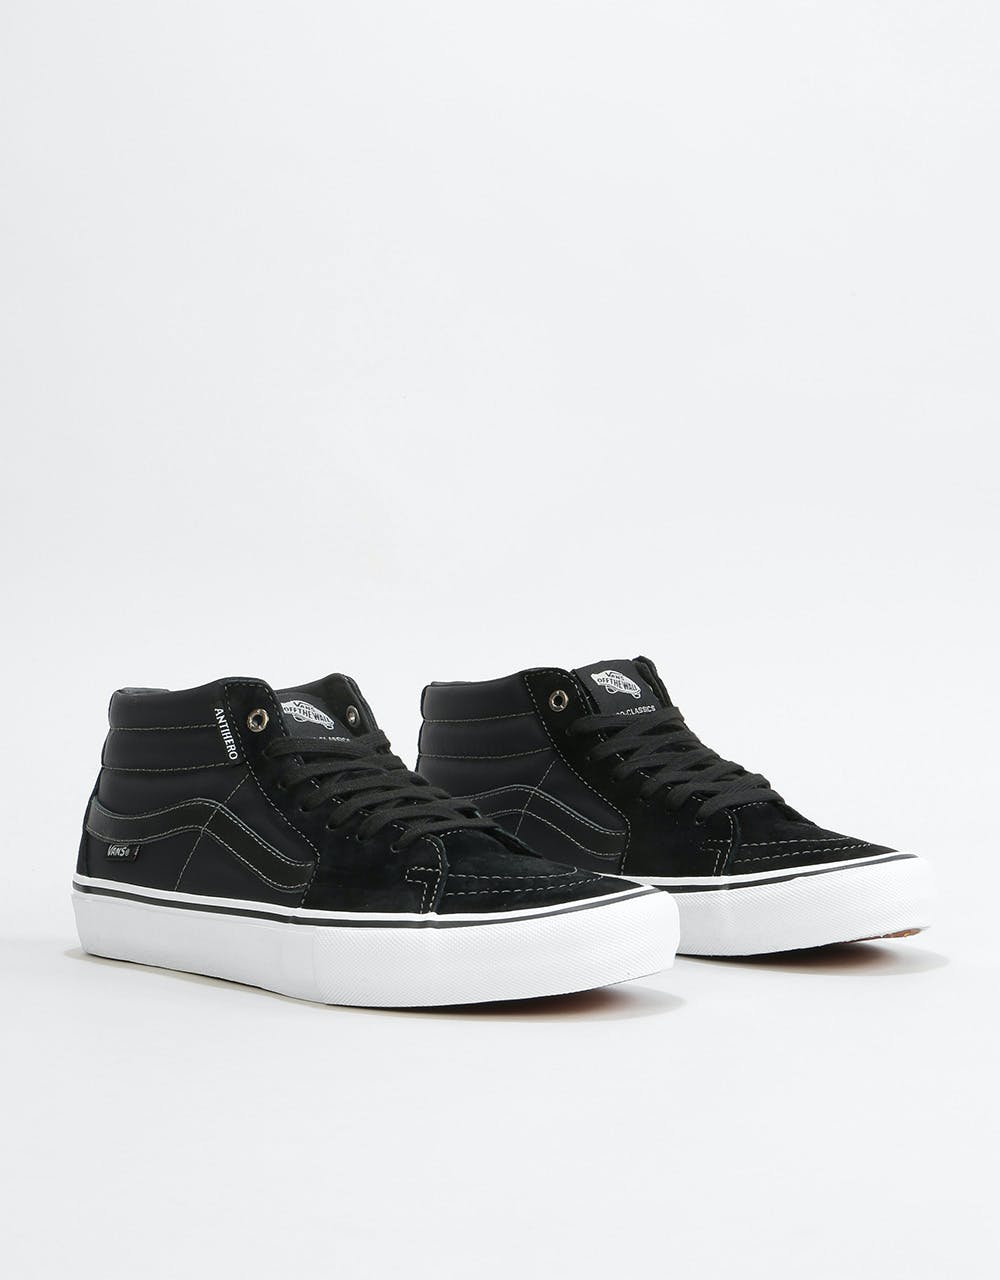 Vans Sk8-Mid Pro Skate Shoes - (Anti Hero) Grosso/Black – Route One